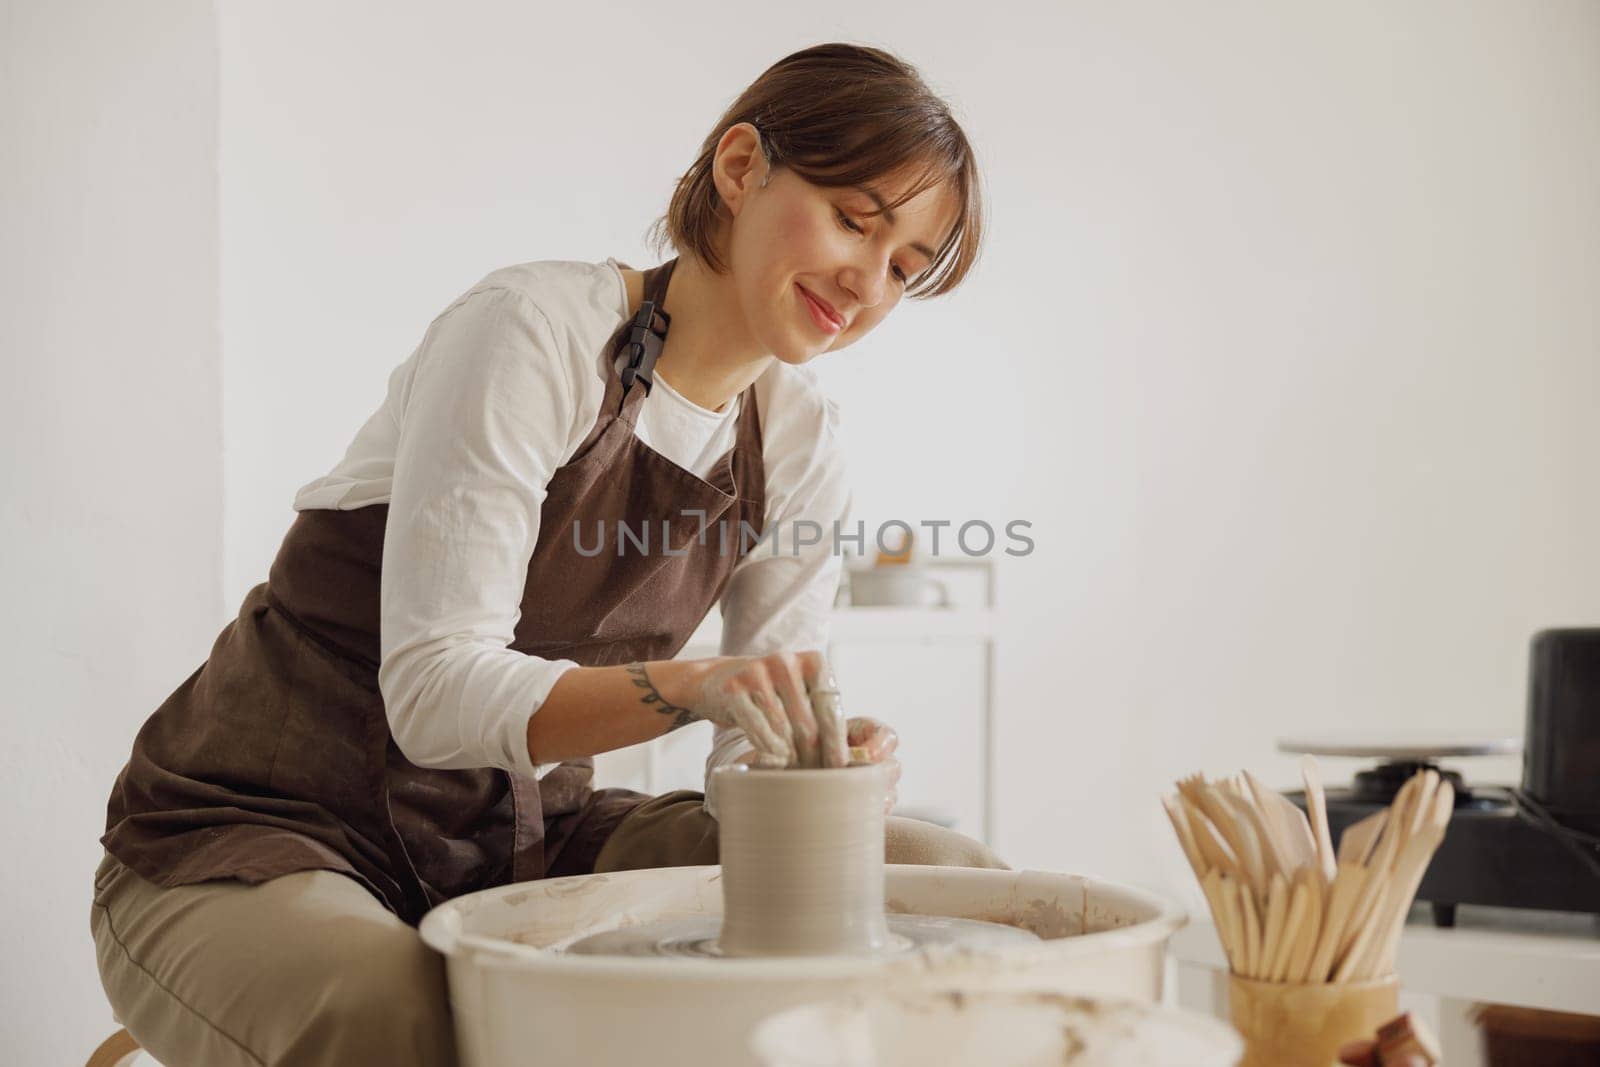 Professional female artisan shaping clay bowl in pottery studio. Ceramics art concept